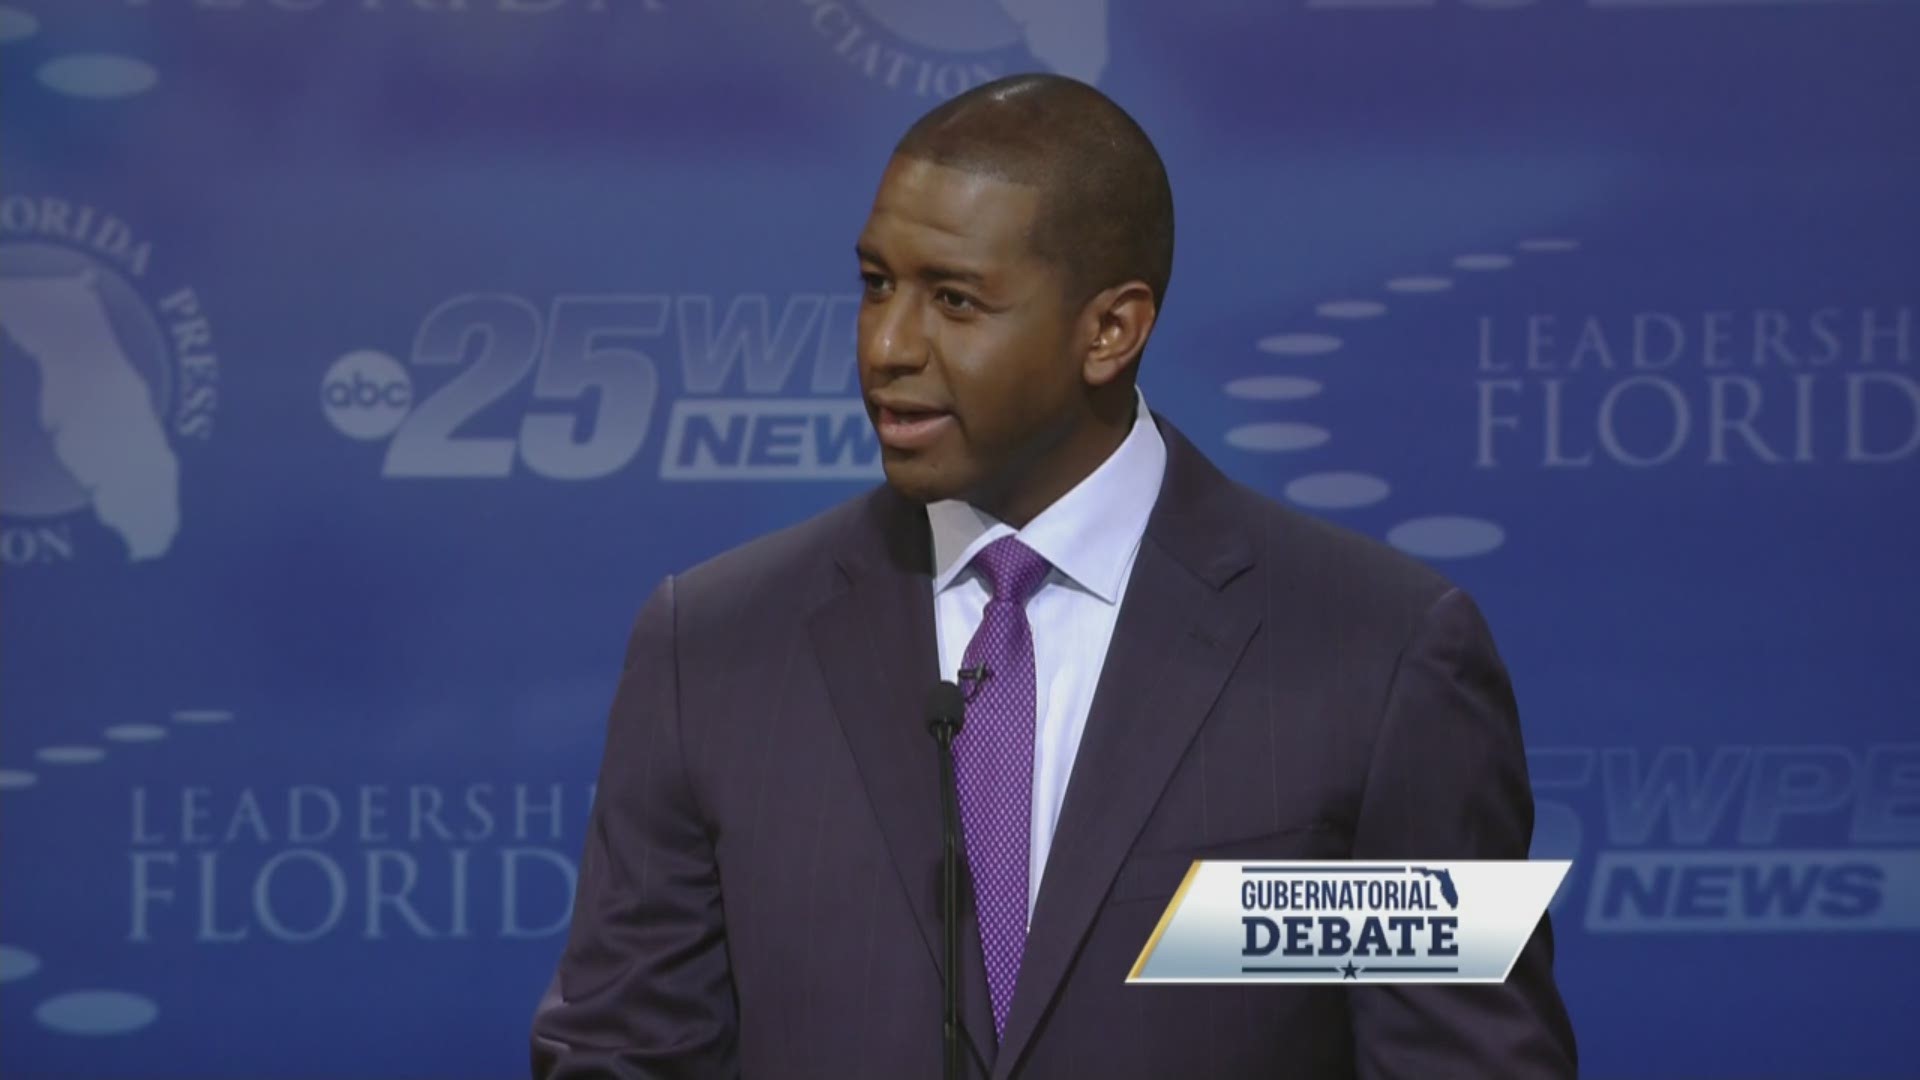 In addressing his Hamilton ticket, Andrew Gillum responded by saying, 'In the state of Florida we've got a lot of issues. In fact, we got 99 issues and Hamilton ain't one of them.'